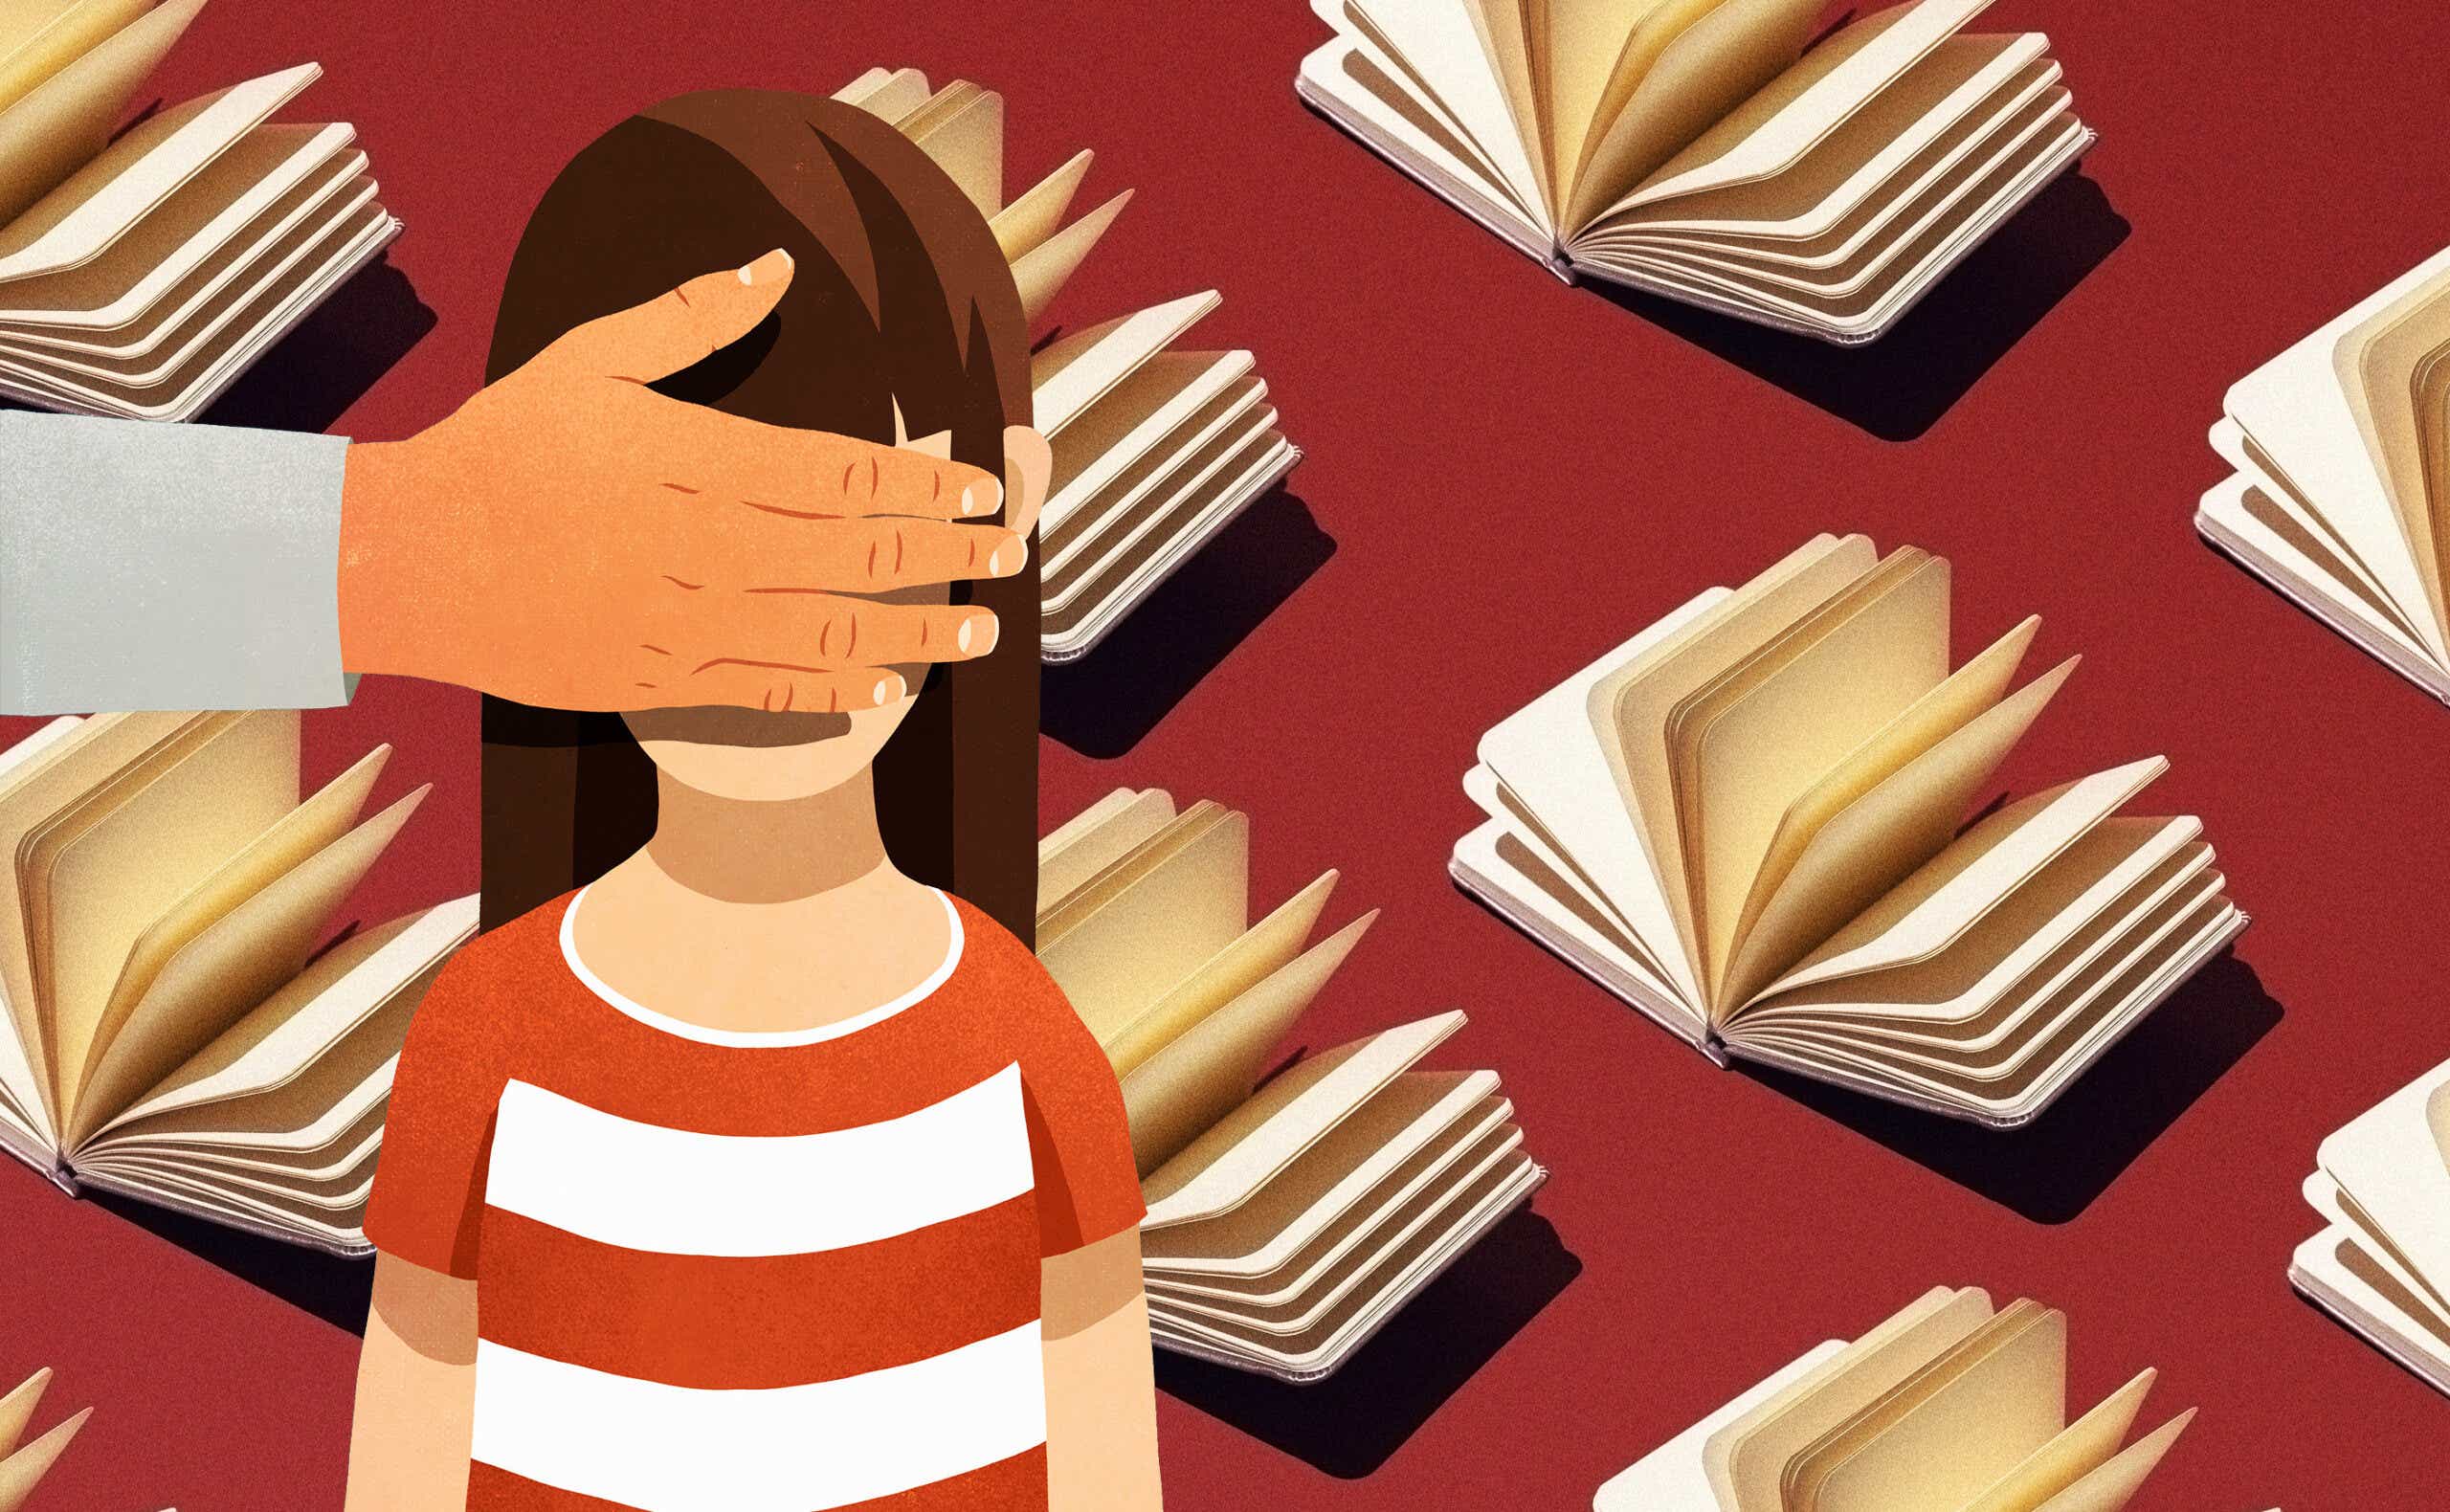 Illustration of an adult hand covering the eyes of a child, over a background of open books